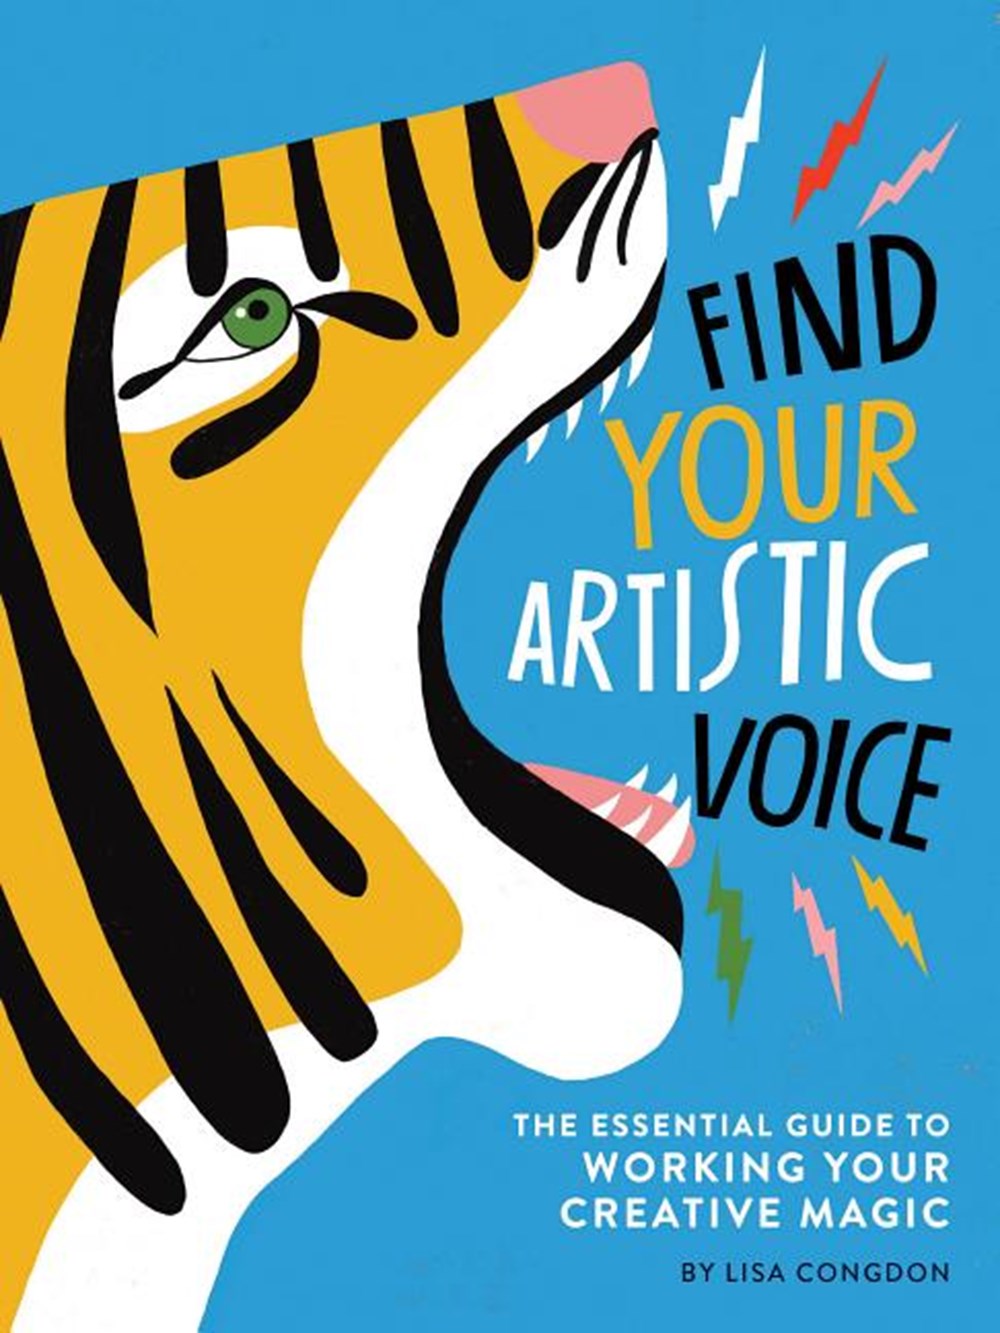 Find Your Artistic Voice: The Essential Guide to Working Your Creative Magic (Art Book for Artists, 